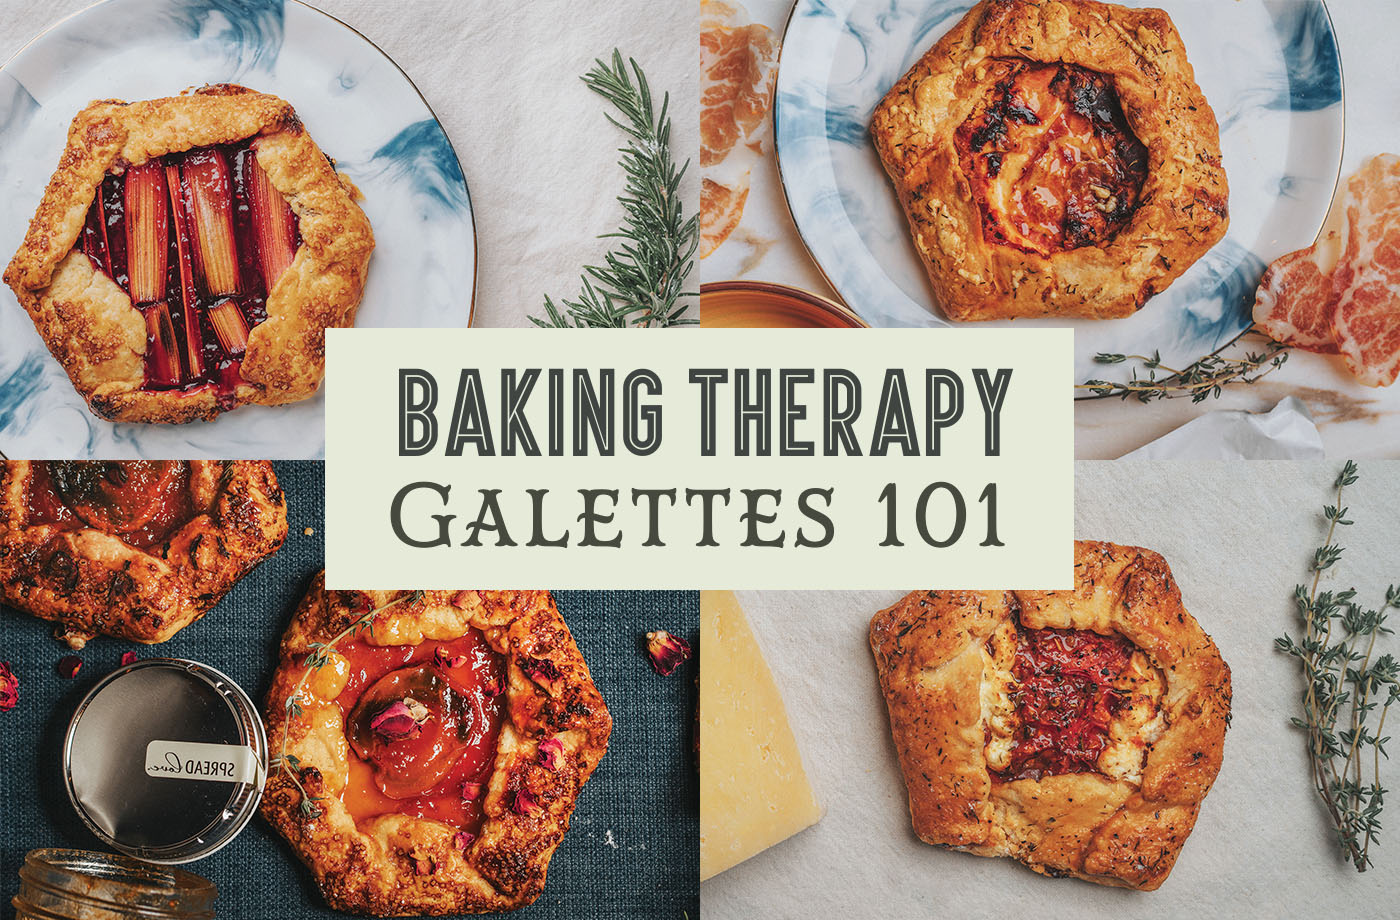 SLUG Food photographer Talyn Behzad gives us a rundown of the art of the galette, featuring fresh ingredients from local favorites.